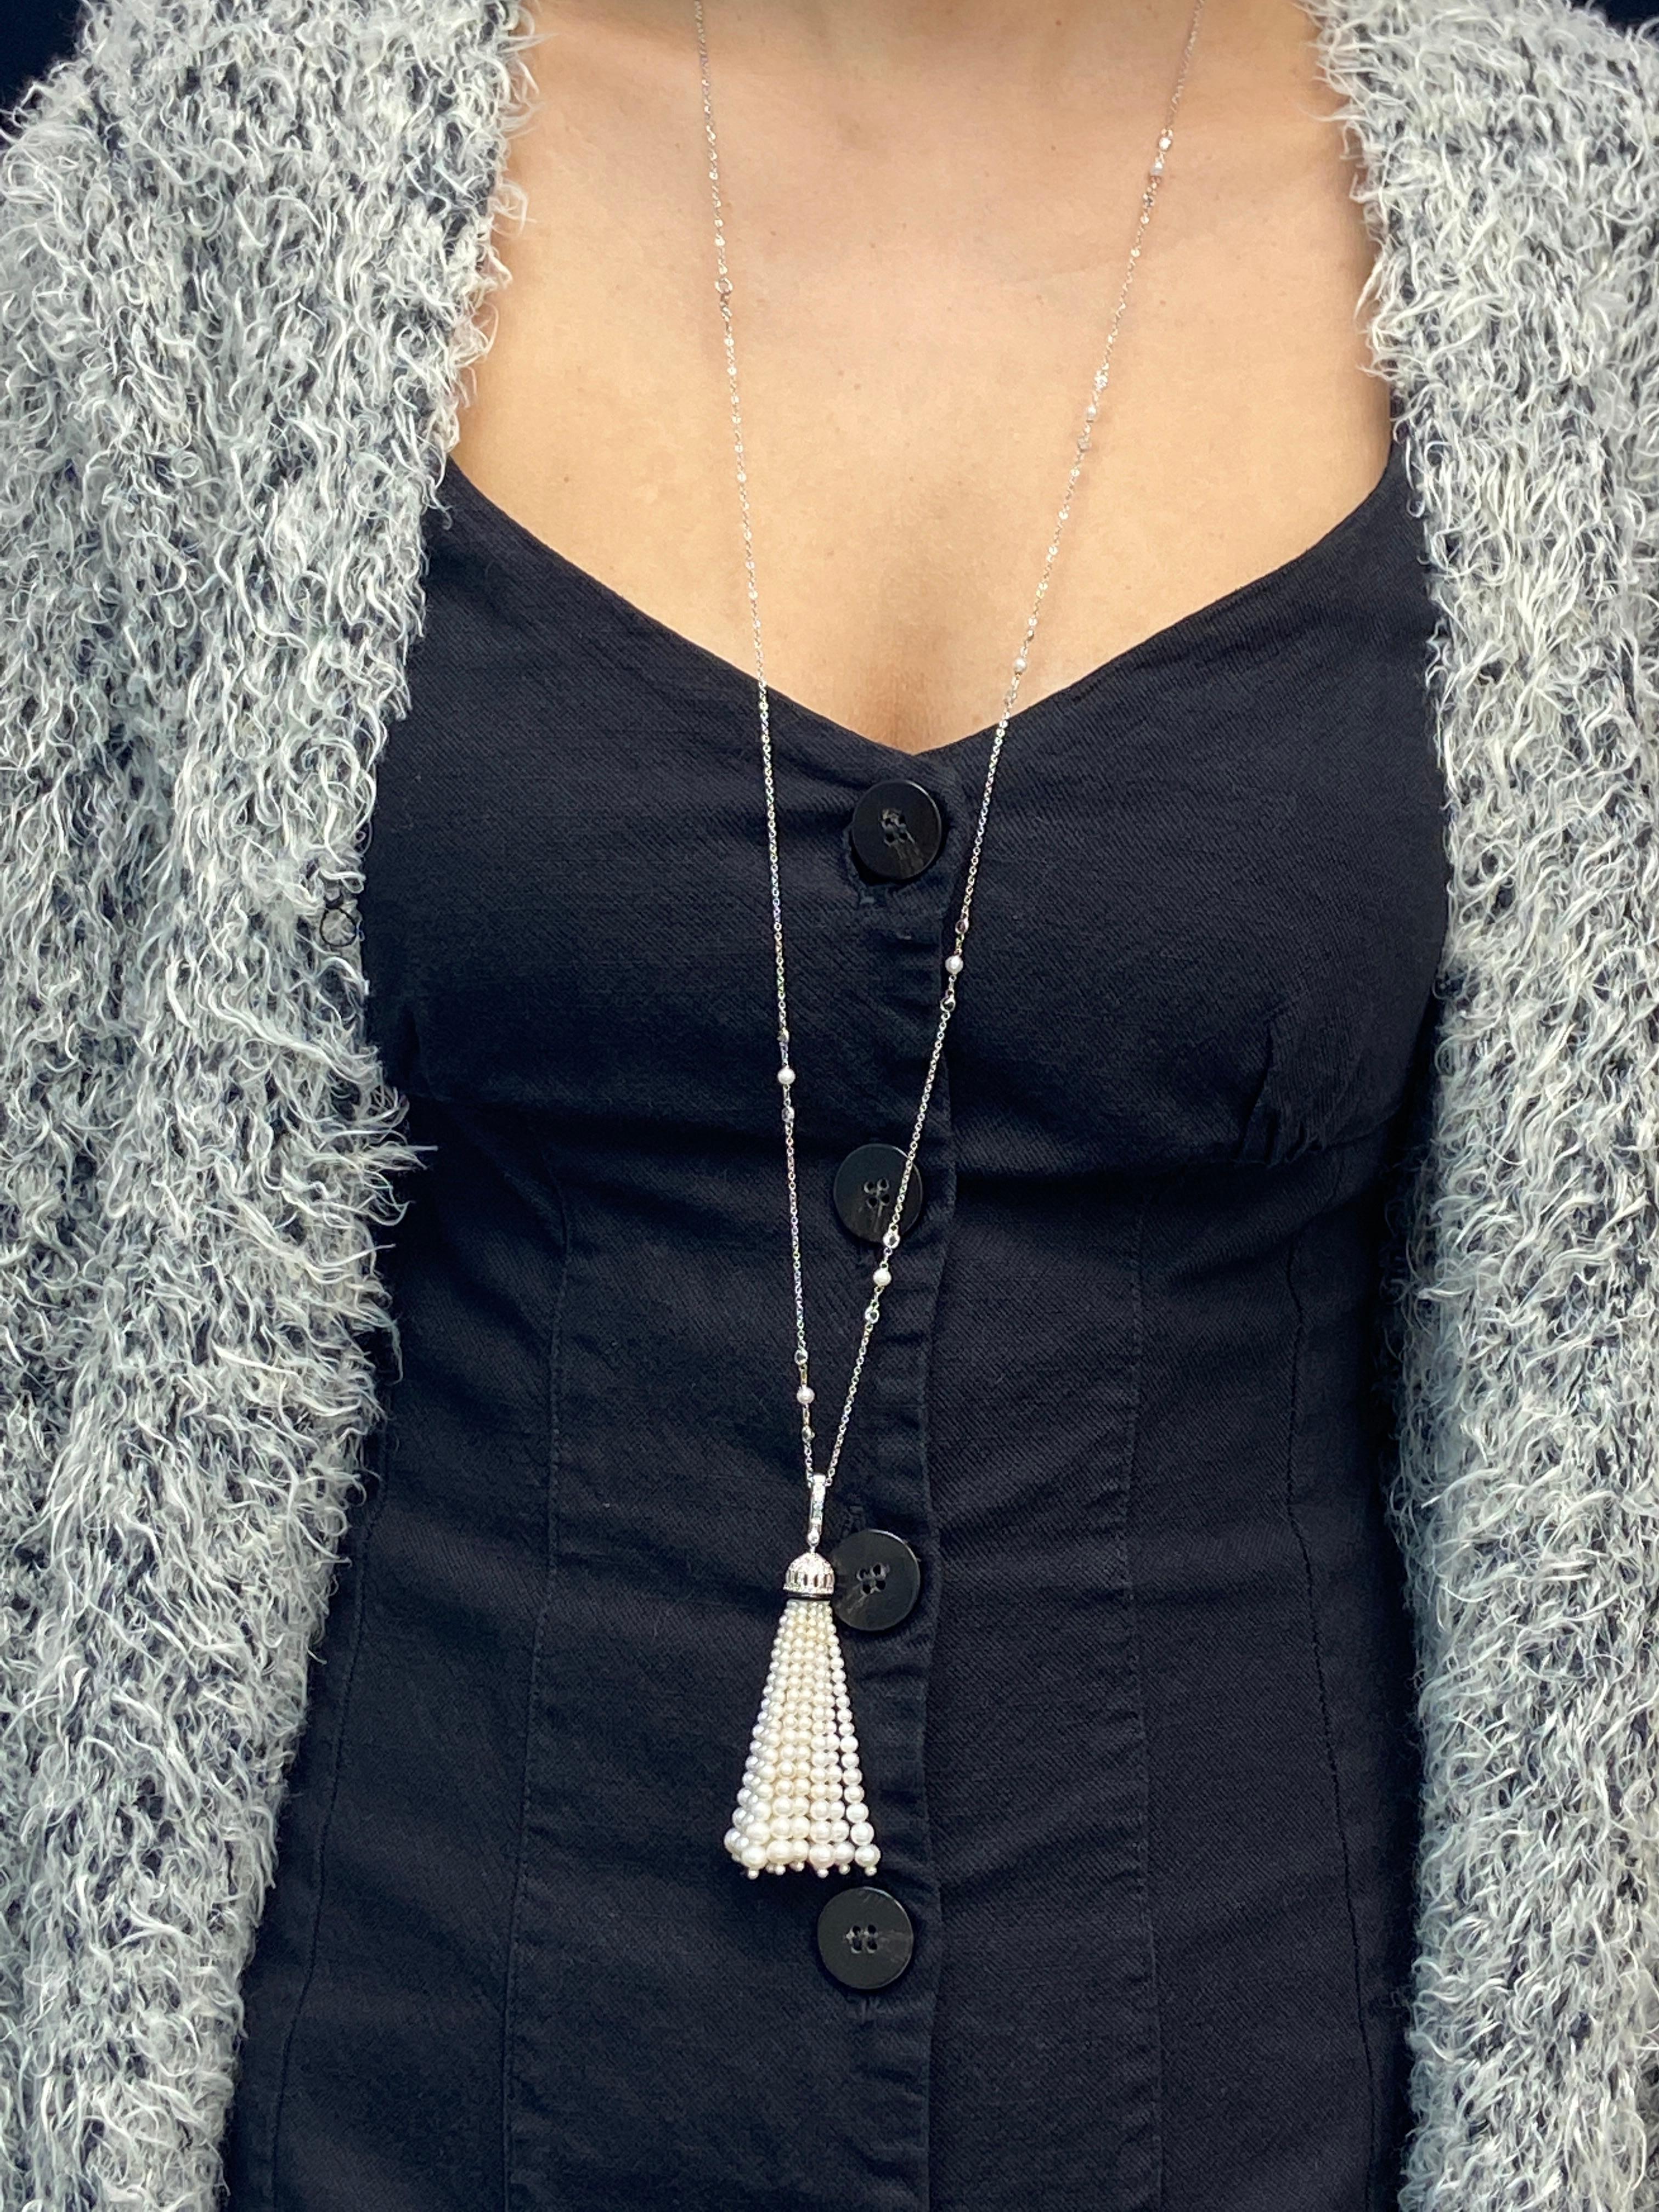 White Pearls, Black Onyx, and White Diamond Gold Tassel Necklace 1